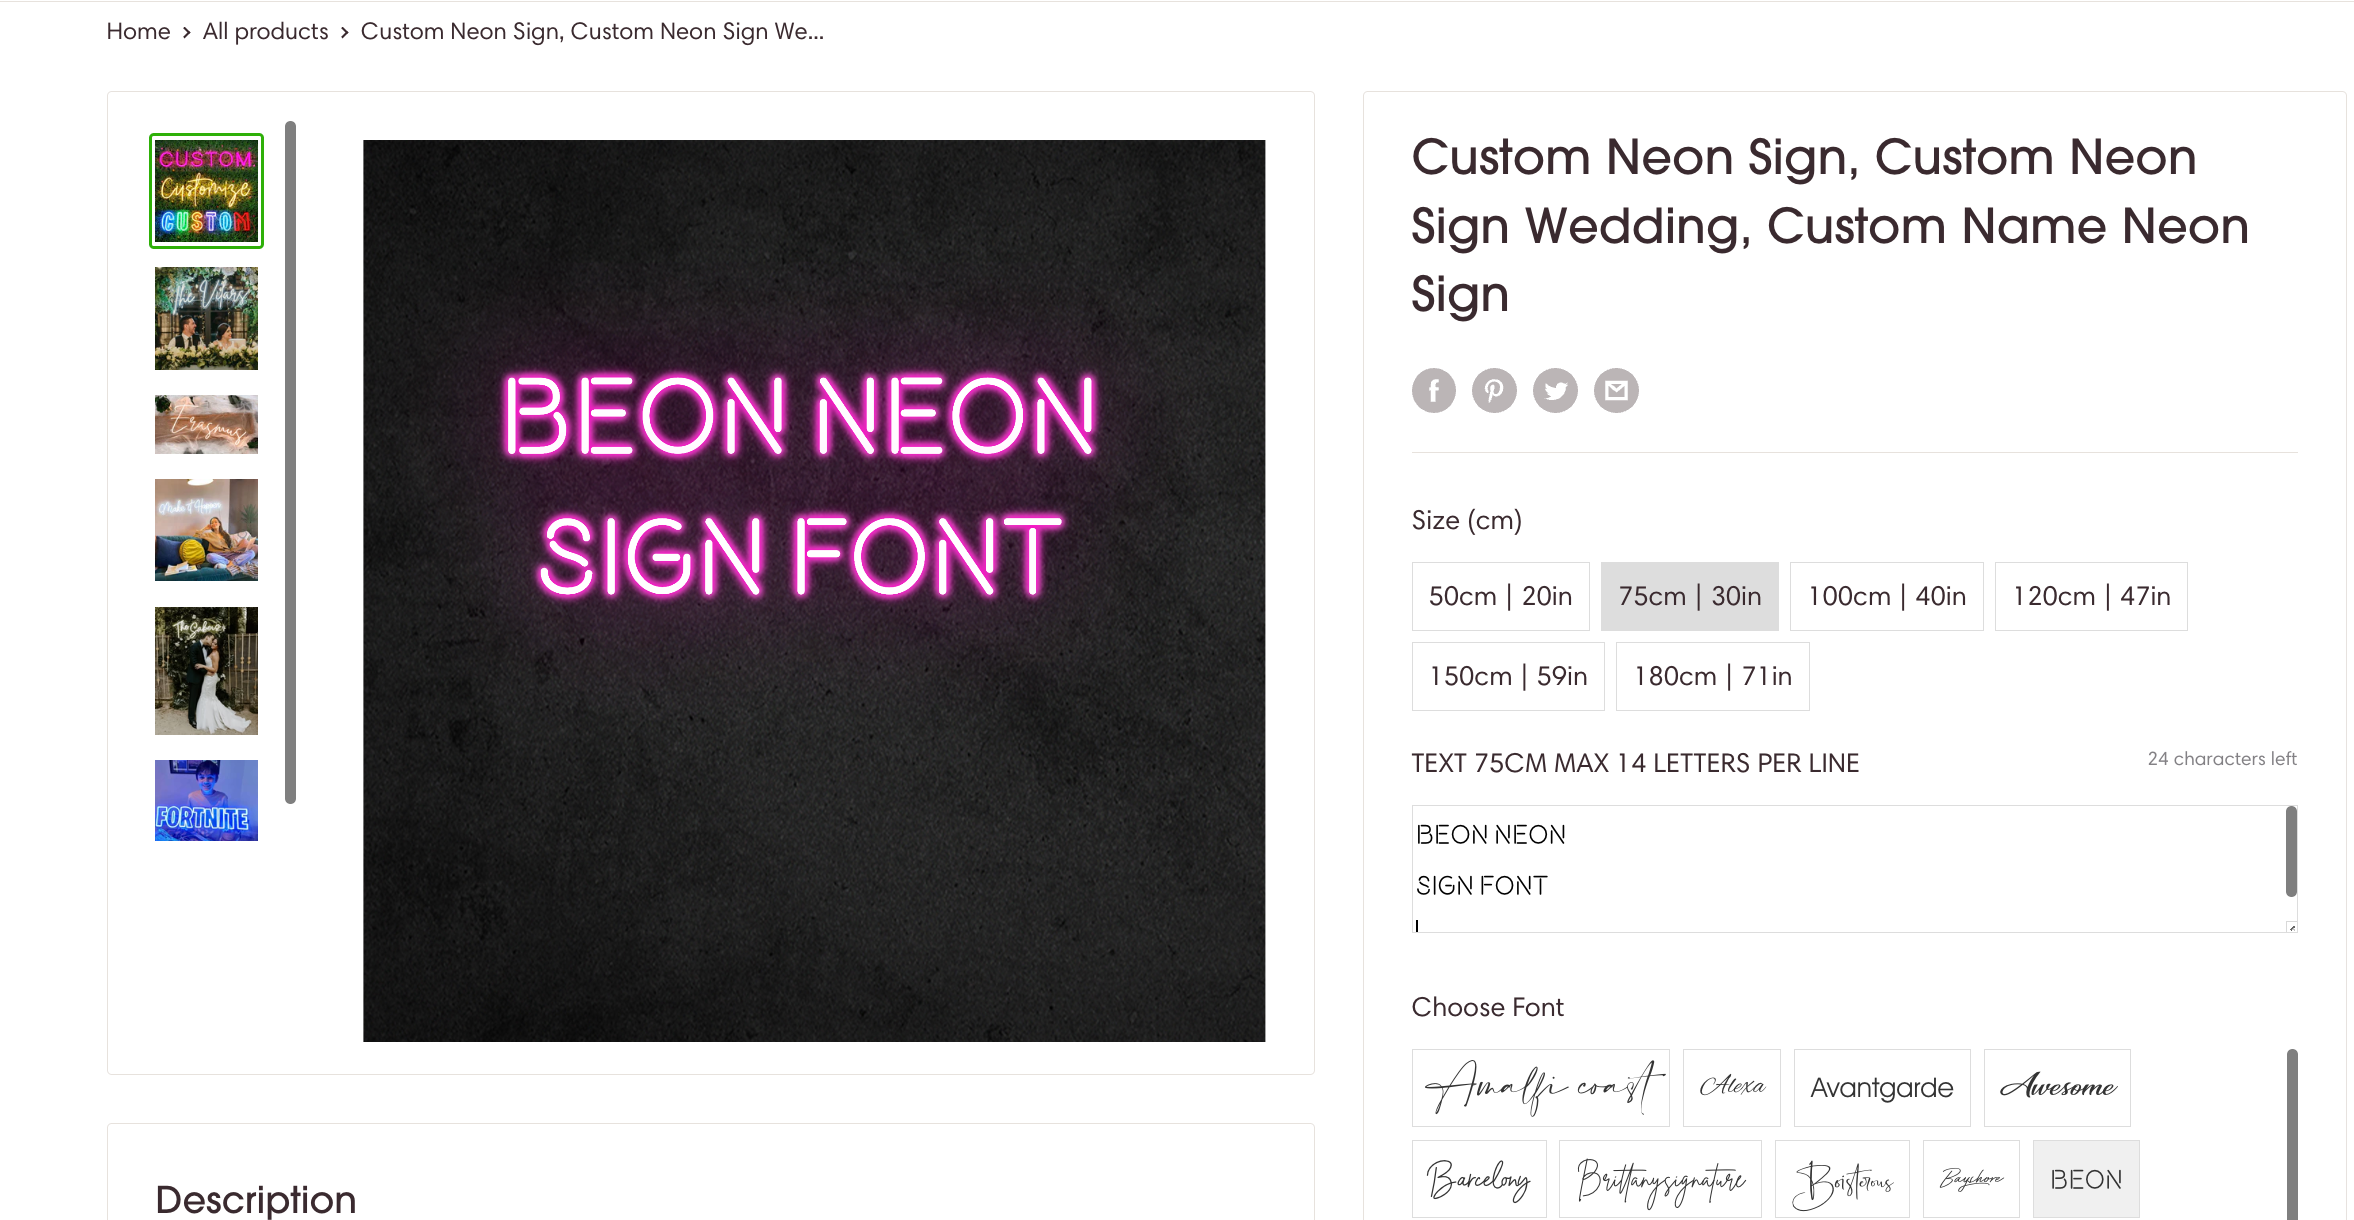 BEON neon sign font